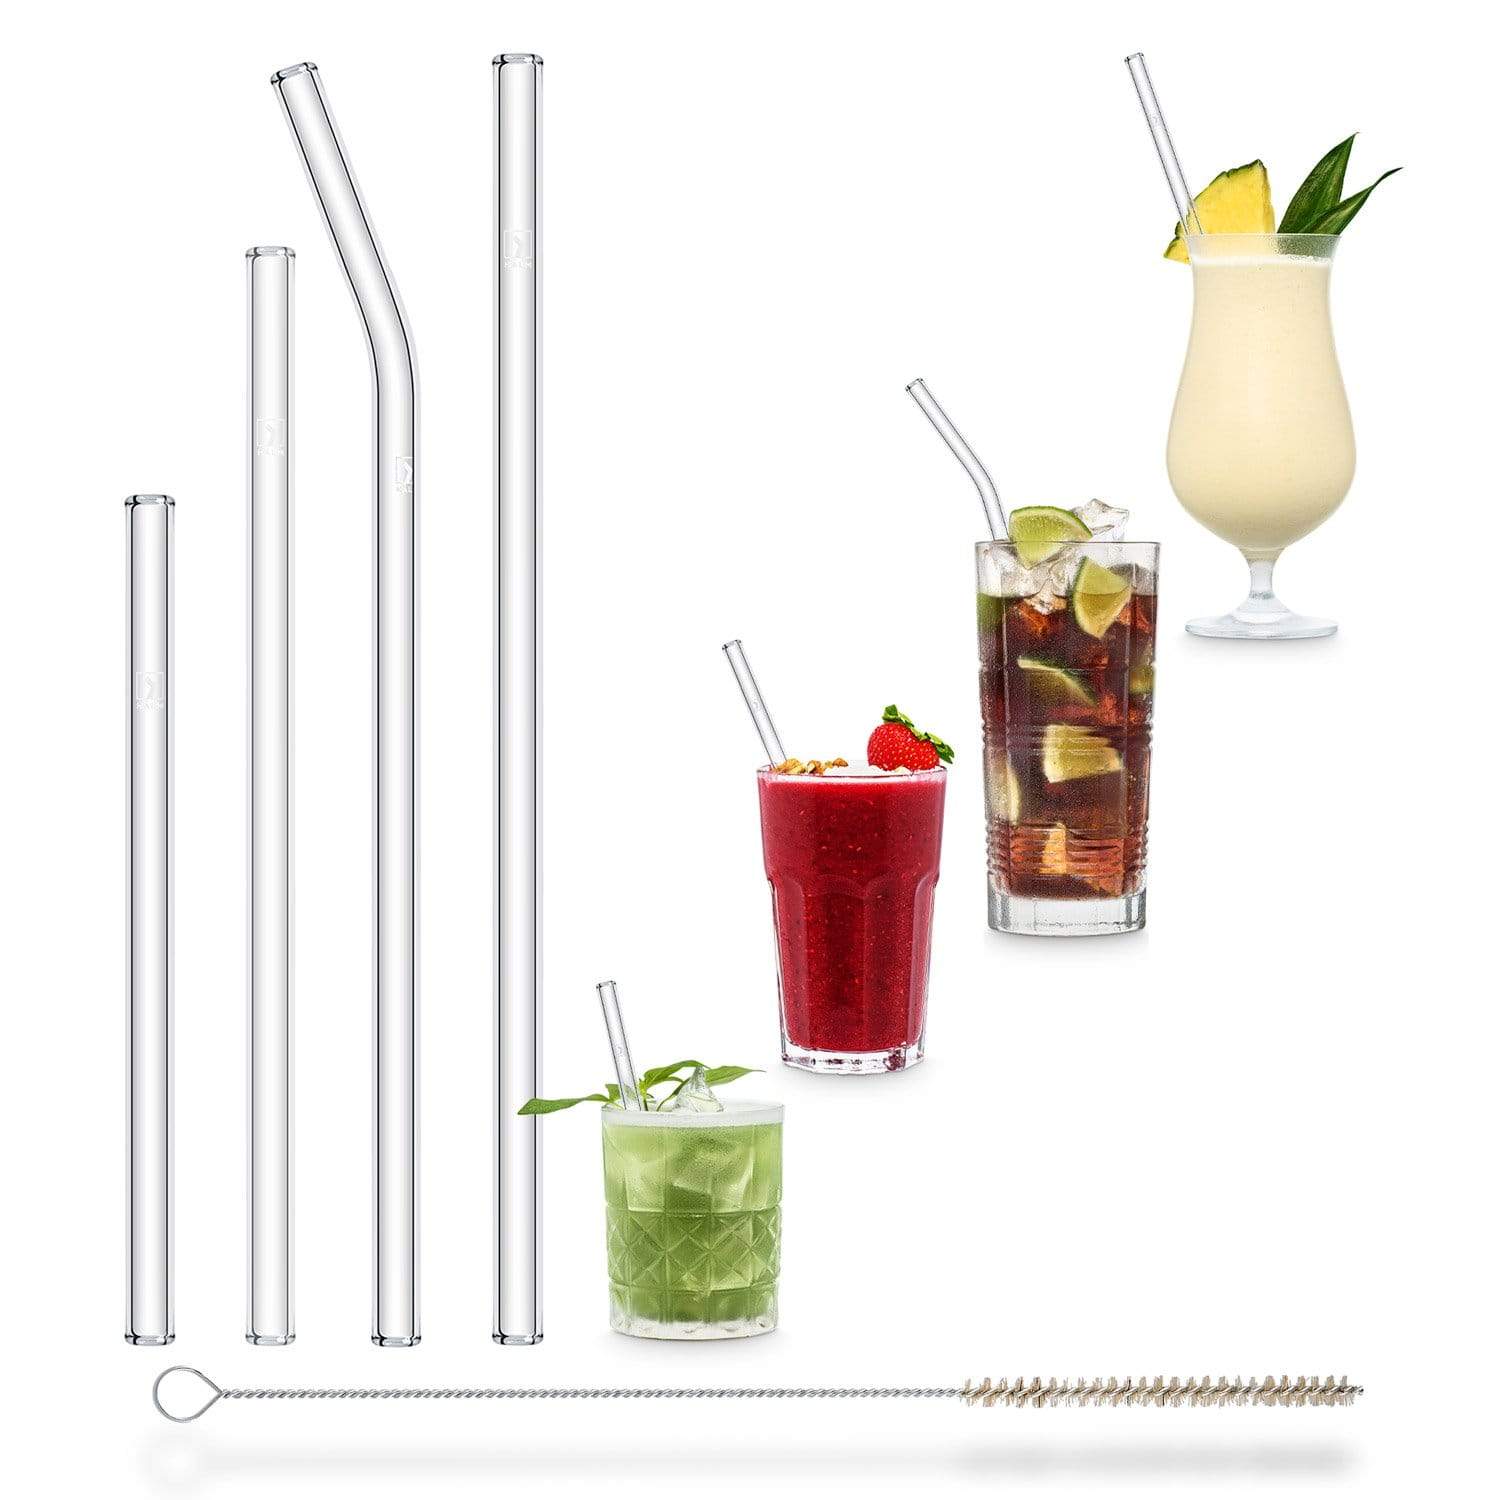 Halm Reusable Glass Straws 4 inch with Plastic Free Brush - Set of 6